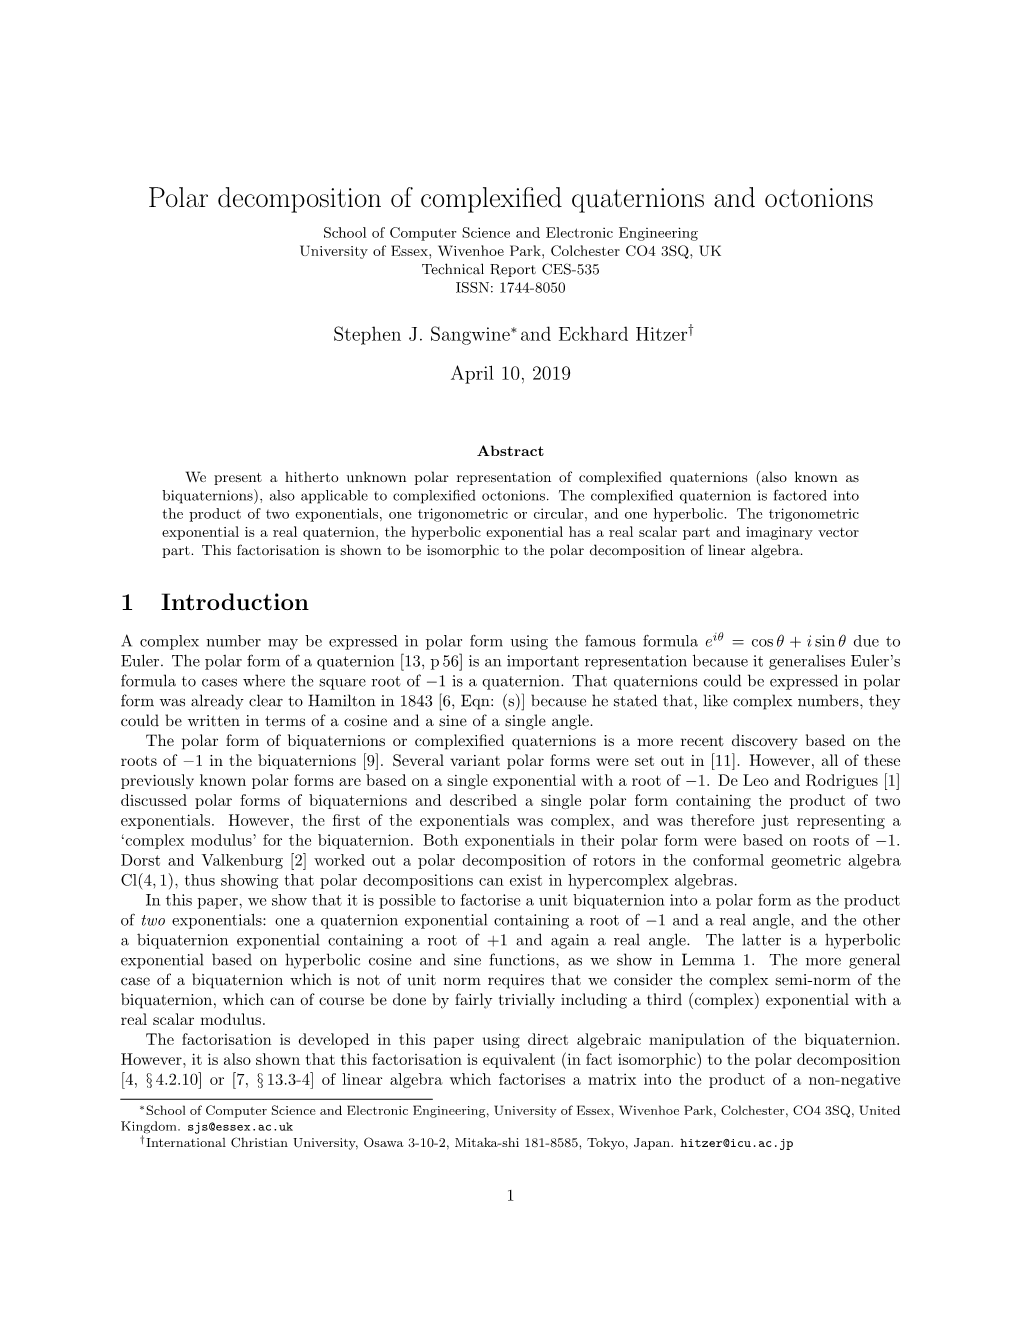 Polar Decomposition of Complexified Quaternions and Octonions